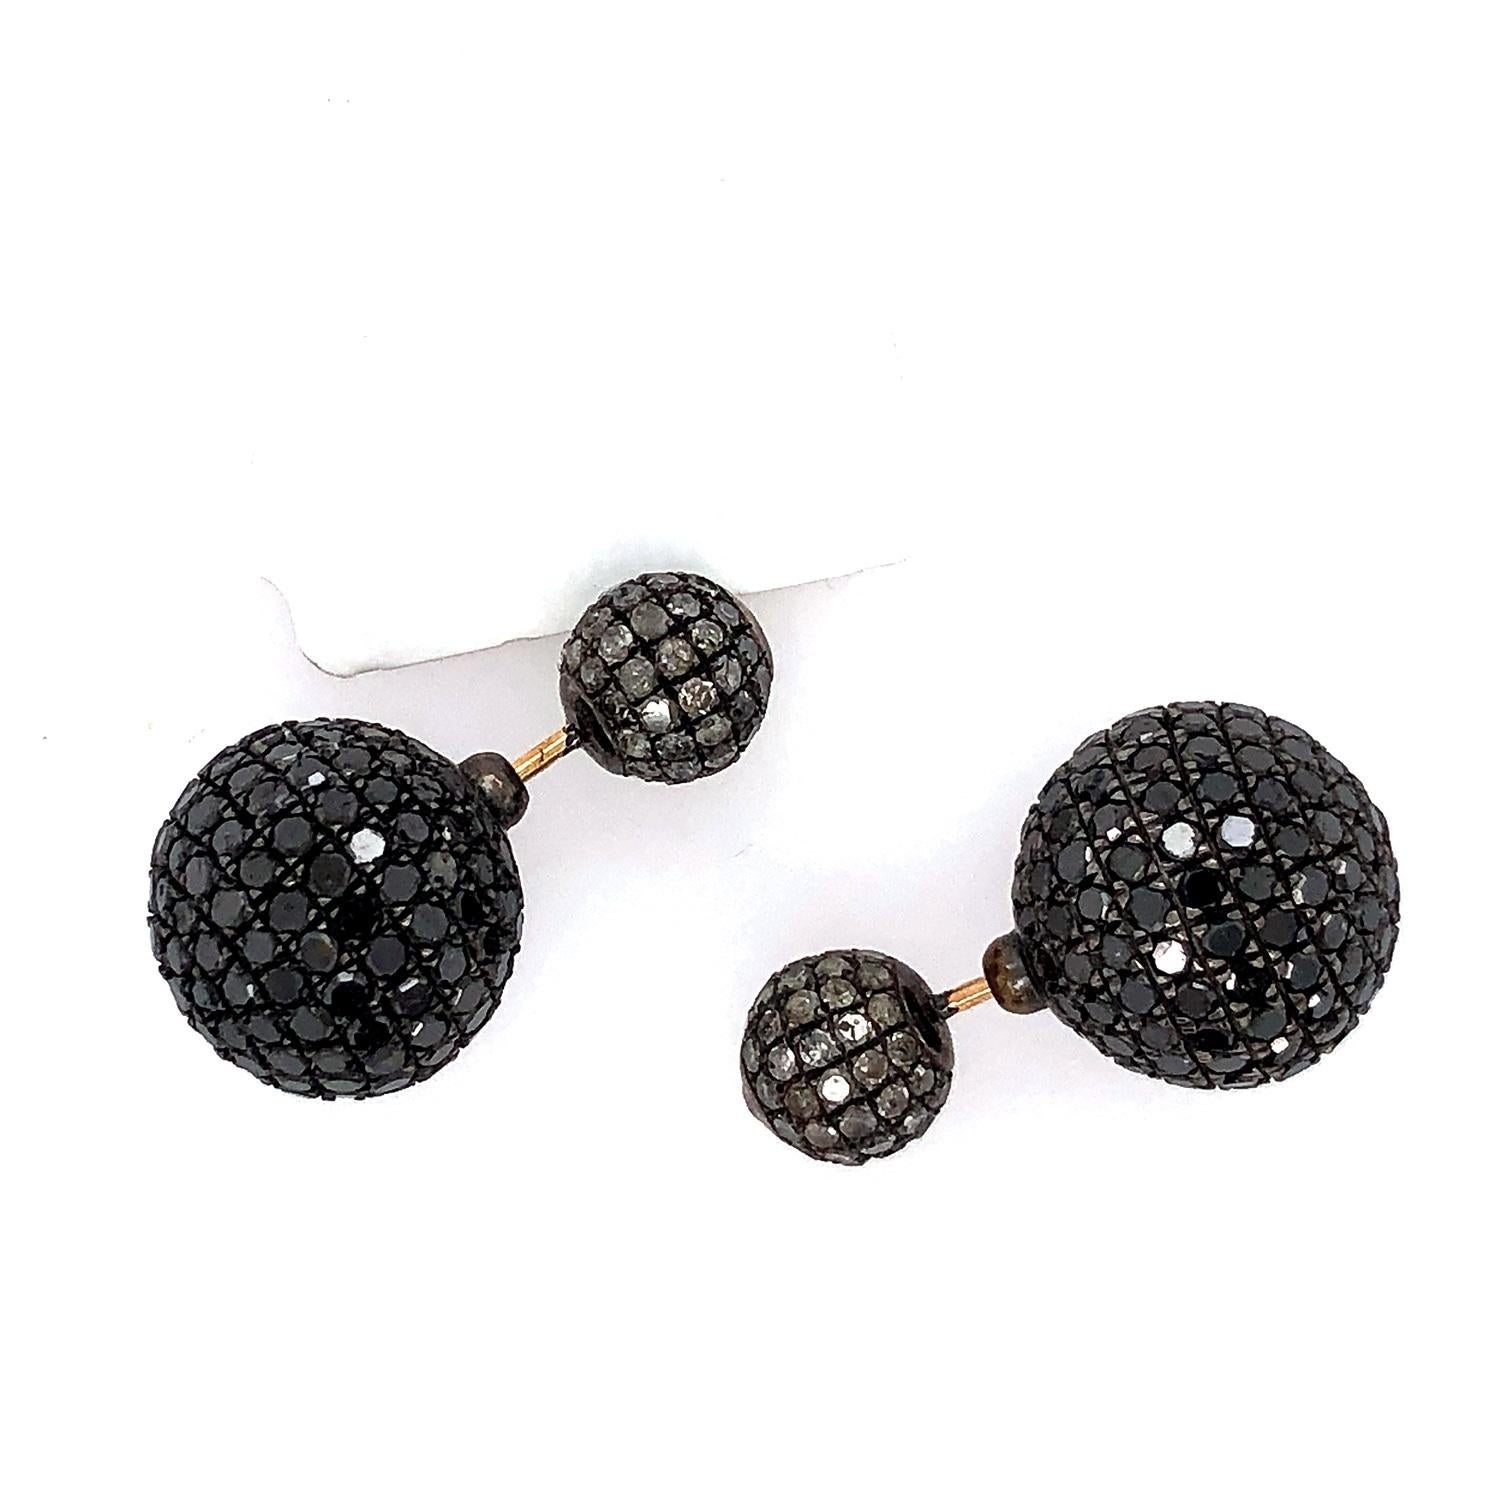 Pave Diamond Ball Tunnel Earrings Made in 18k Gold & Silver im Zustand „Neu“ im Angebot in New York, NY